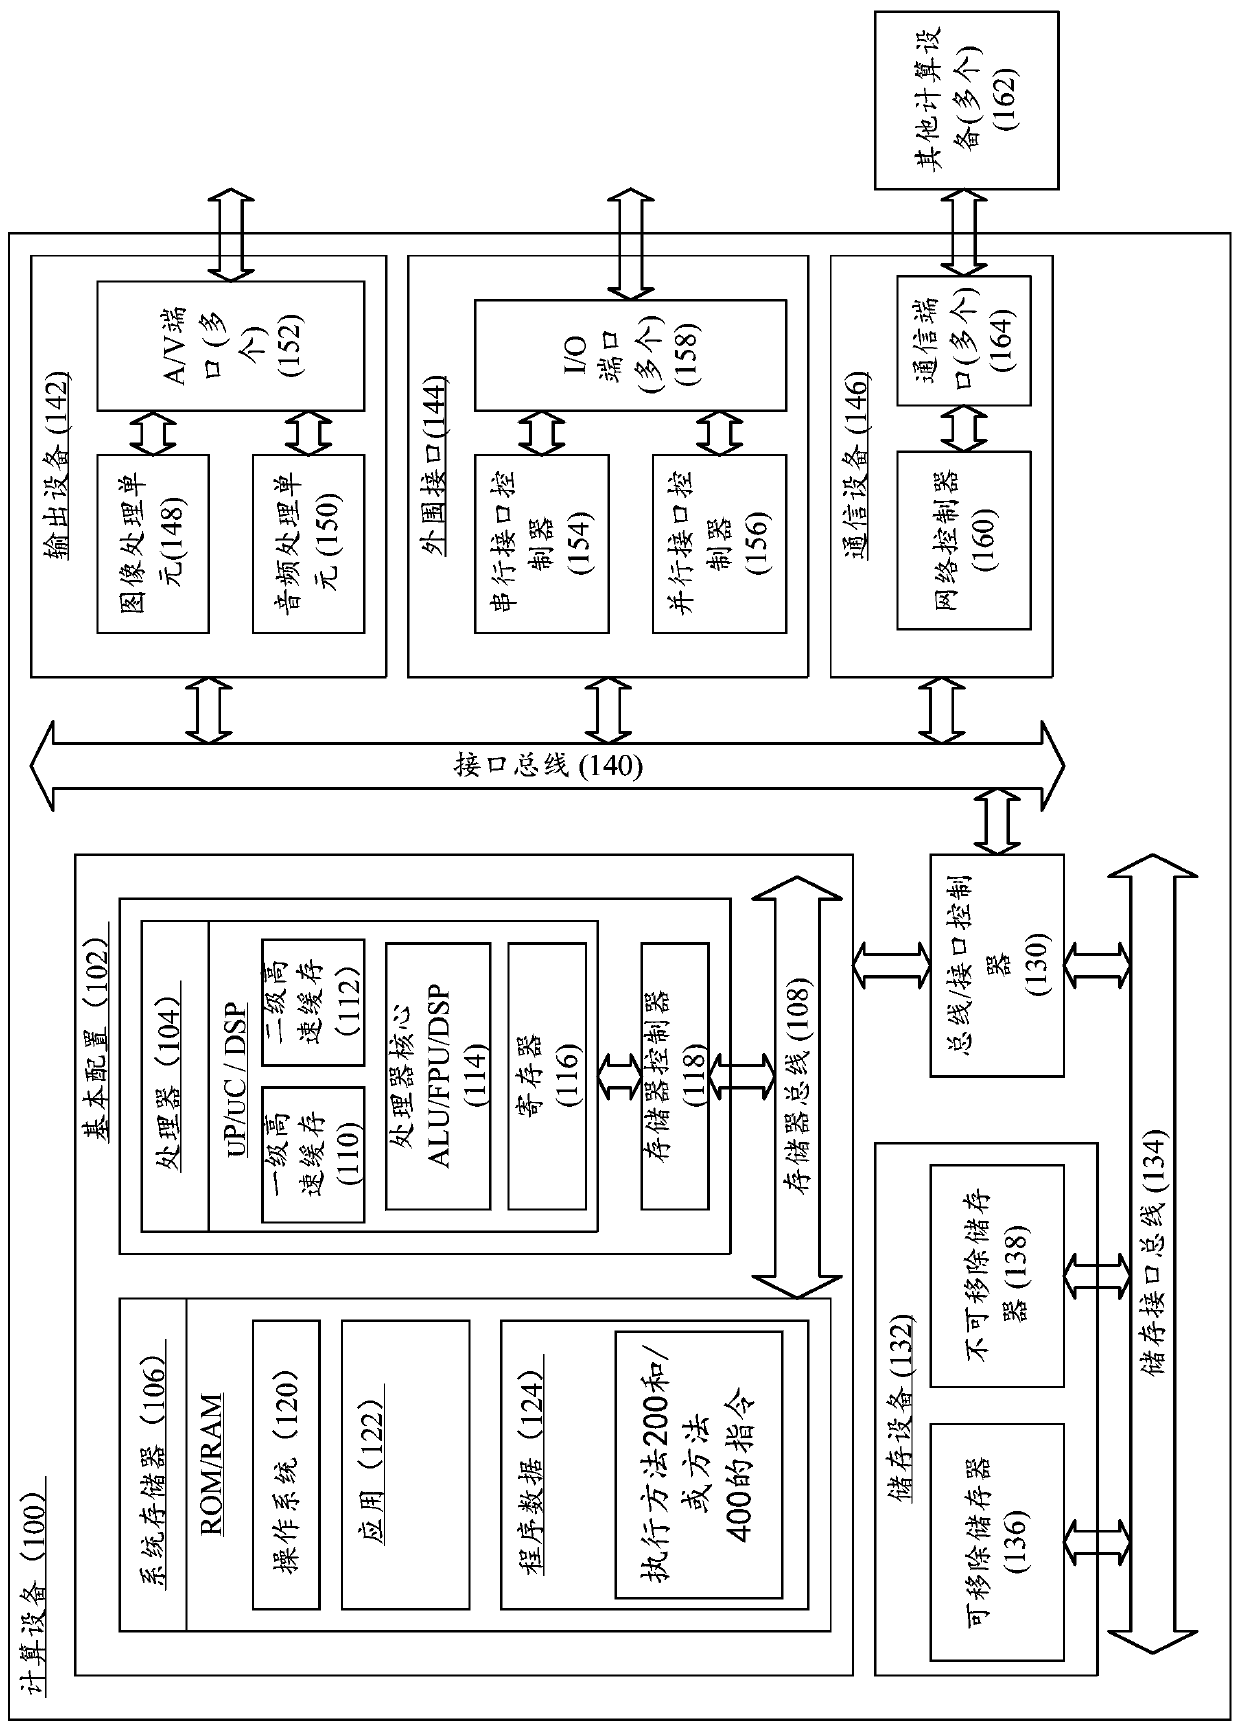 An image-guided filtering method and computing device